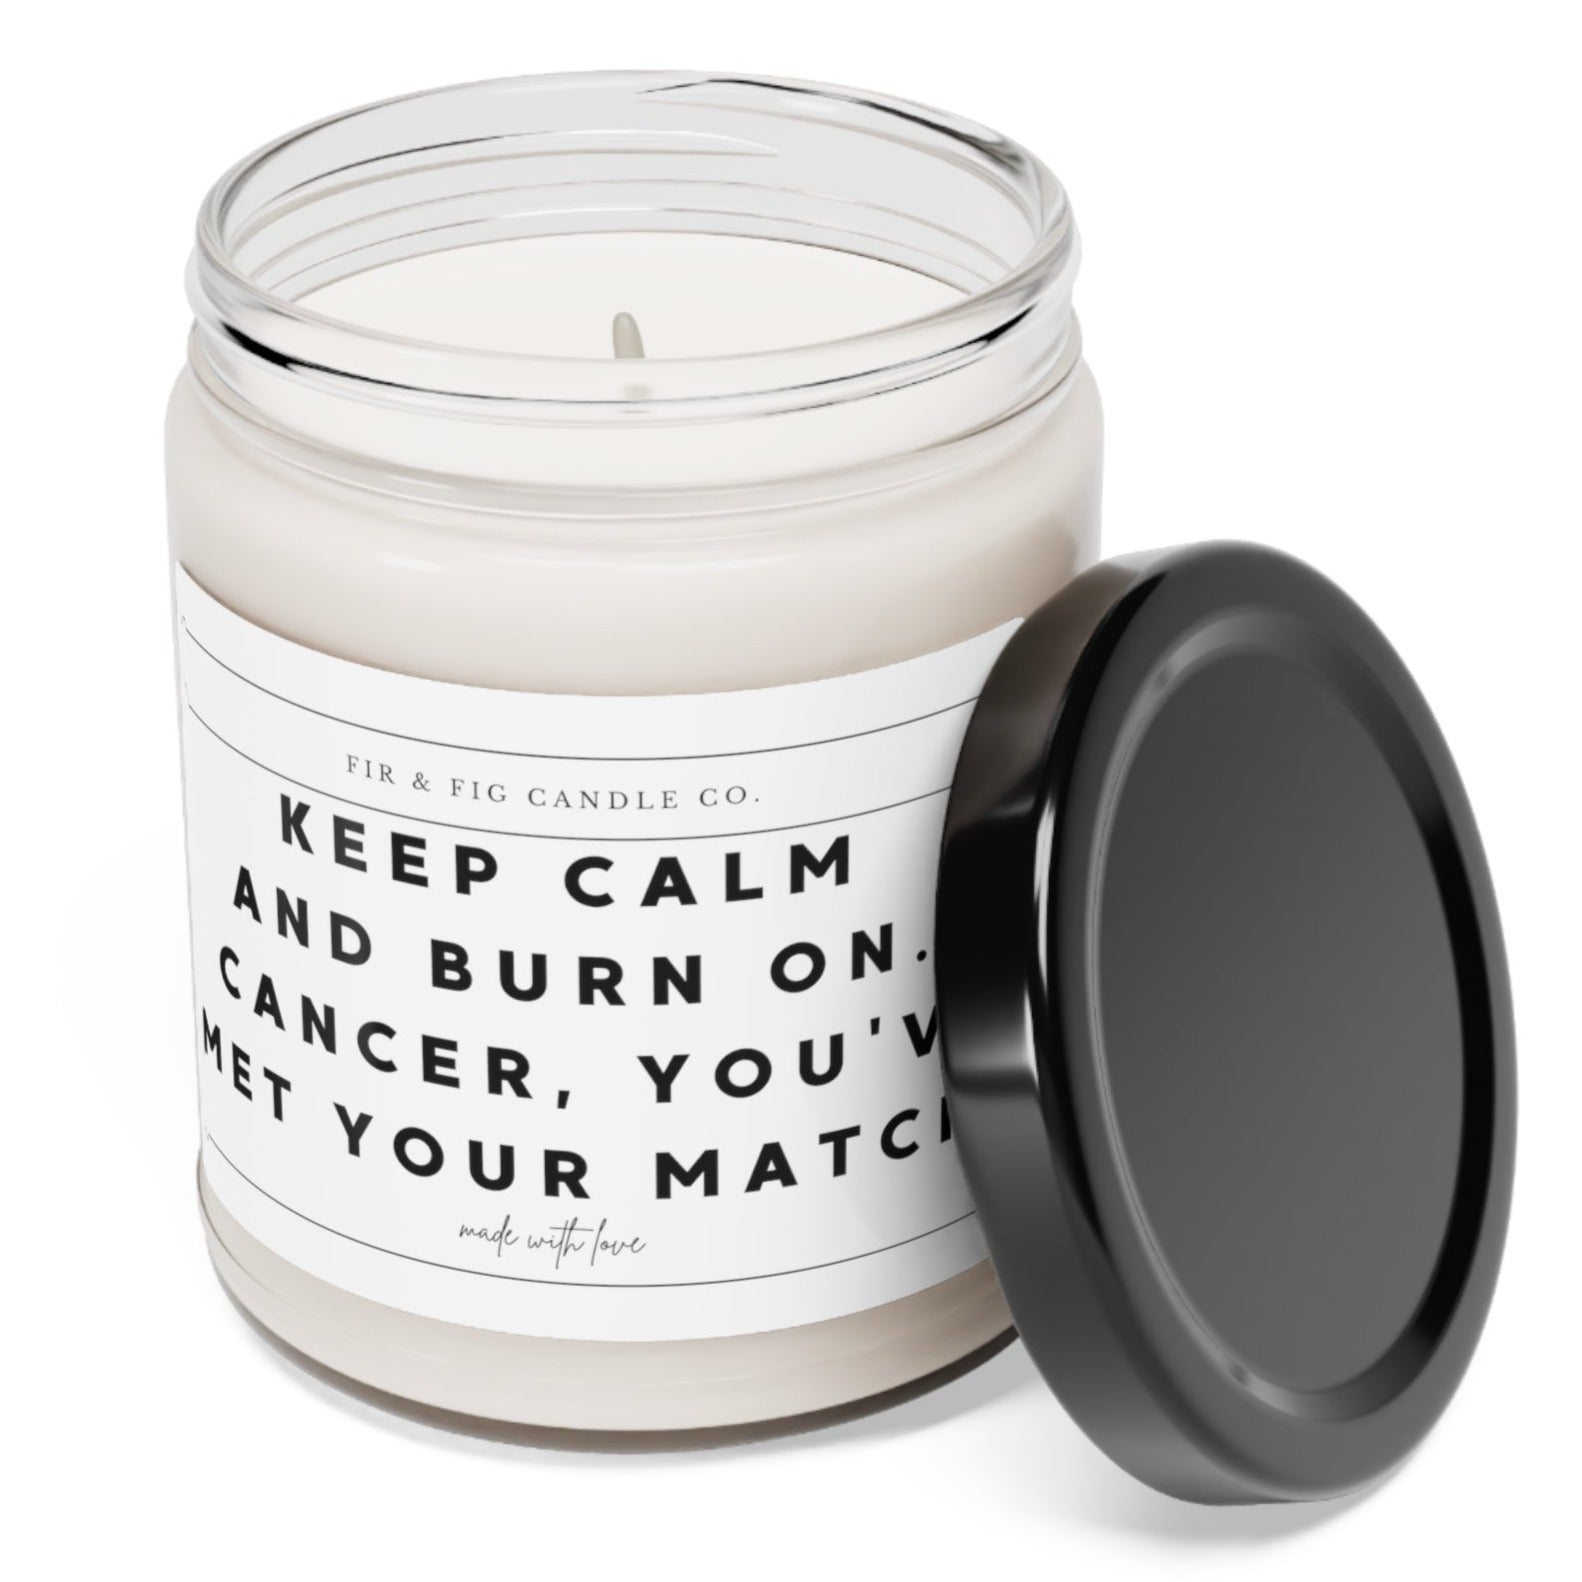 Cancer you have met your Match candle, Eco-Friendly 100% 9oz Soy Candle, Cancer Survivor, Cancer Awareness, Fight Cancer, cancer candle gift